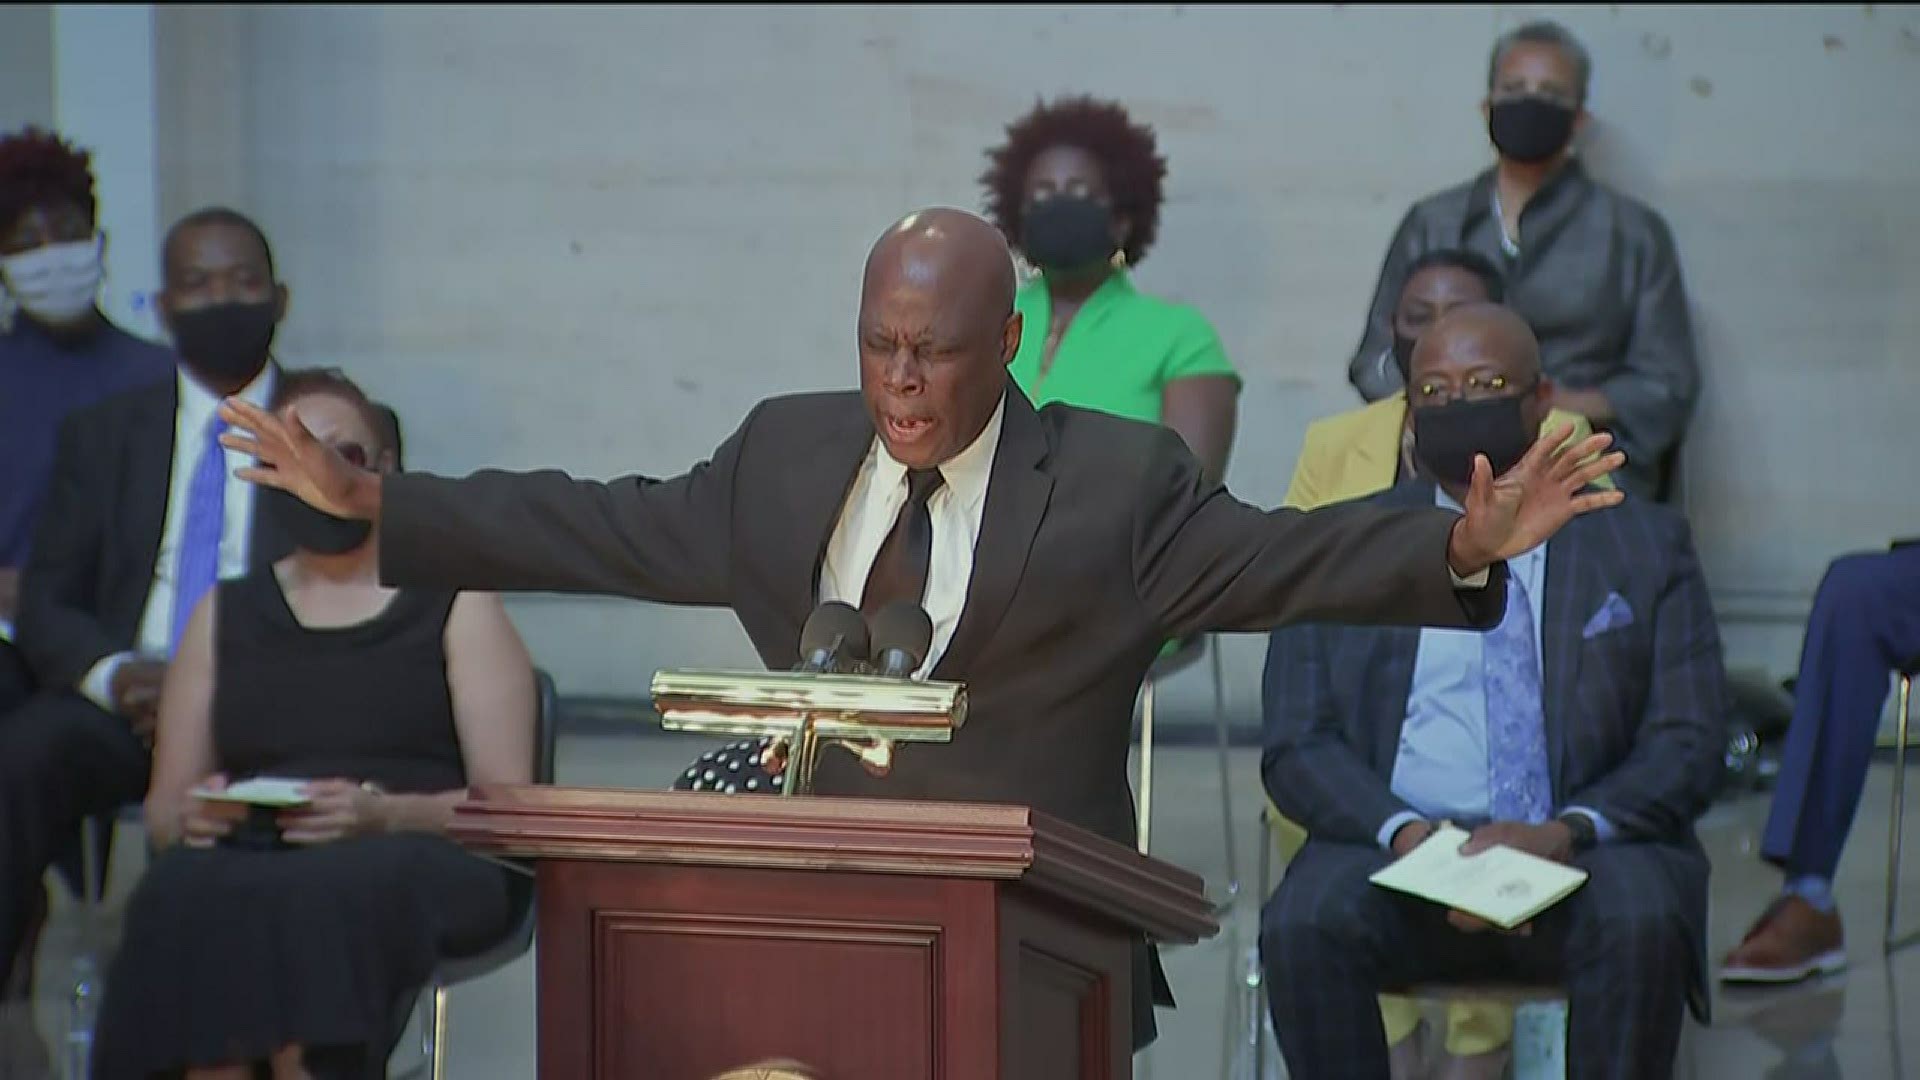 Rev. Wintley Phipps performs Amazing Grace at this ceremony of John Lewis at the Capitol Rotunda.